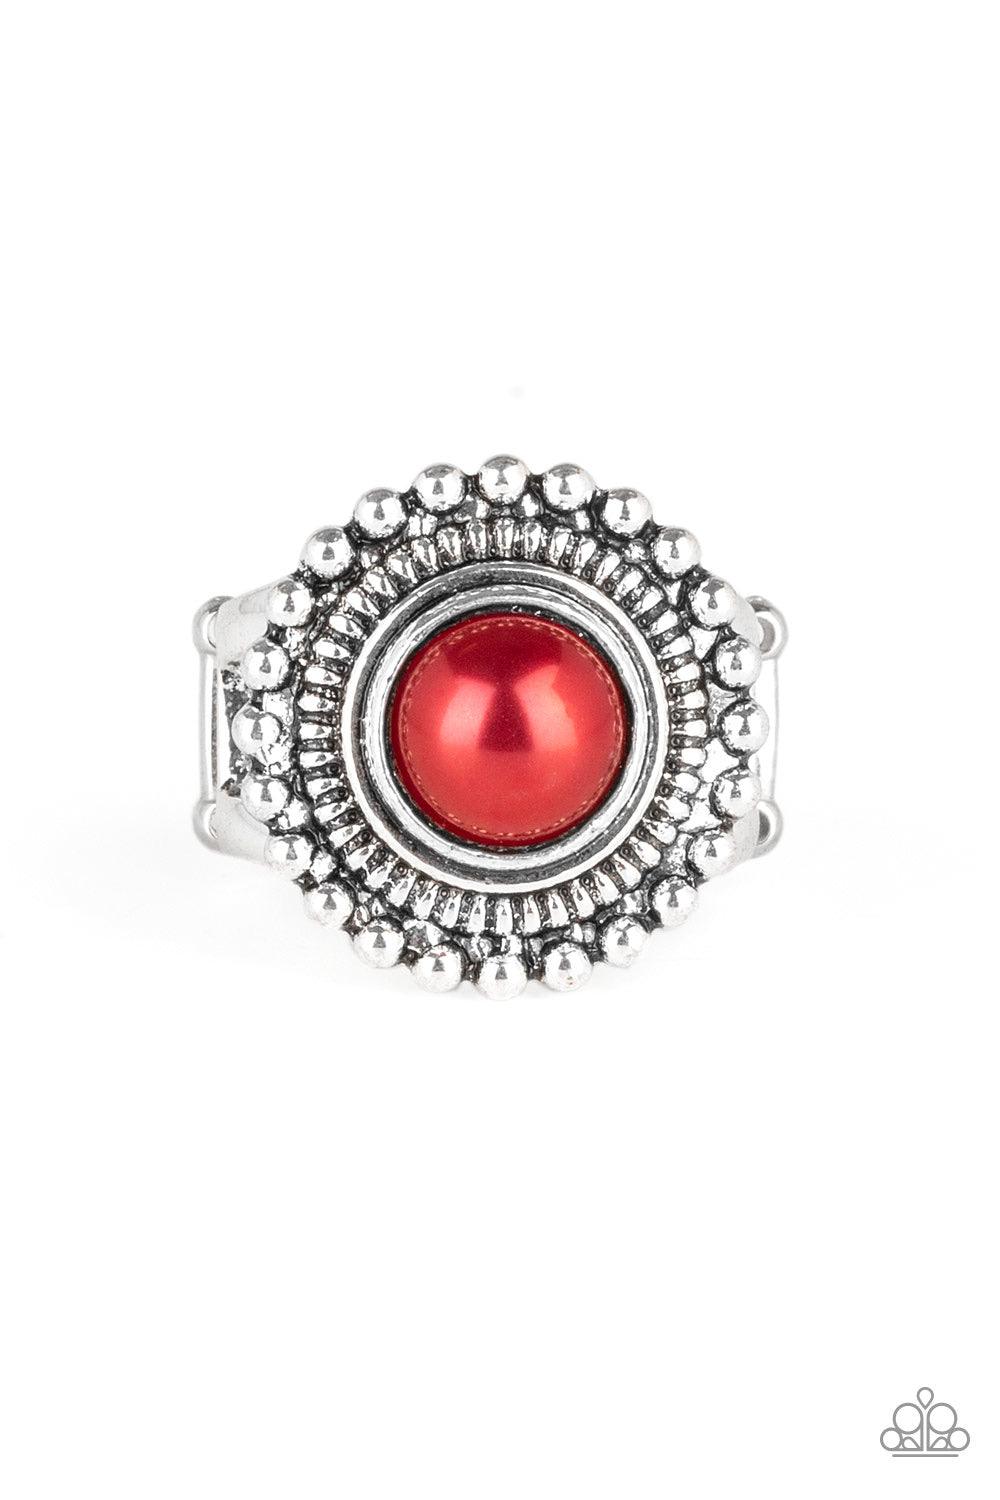 Paparazzi Accessories Regal Royal - Red A roung red bead is pressed into the center of a textured silver frame radiating in a ring of silver studs for a whimsical pop of color. Features a stretchy band for a flexible fit. Jewelry